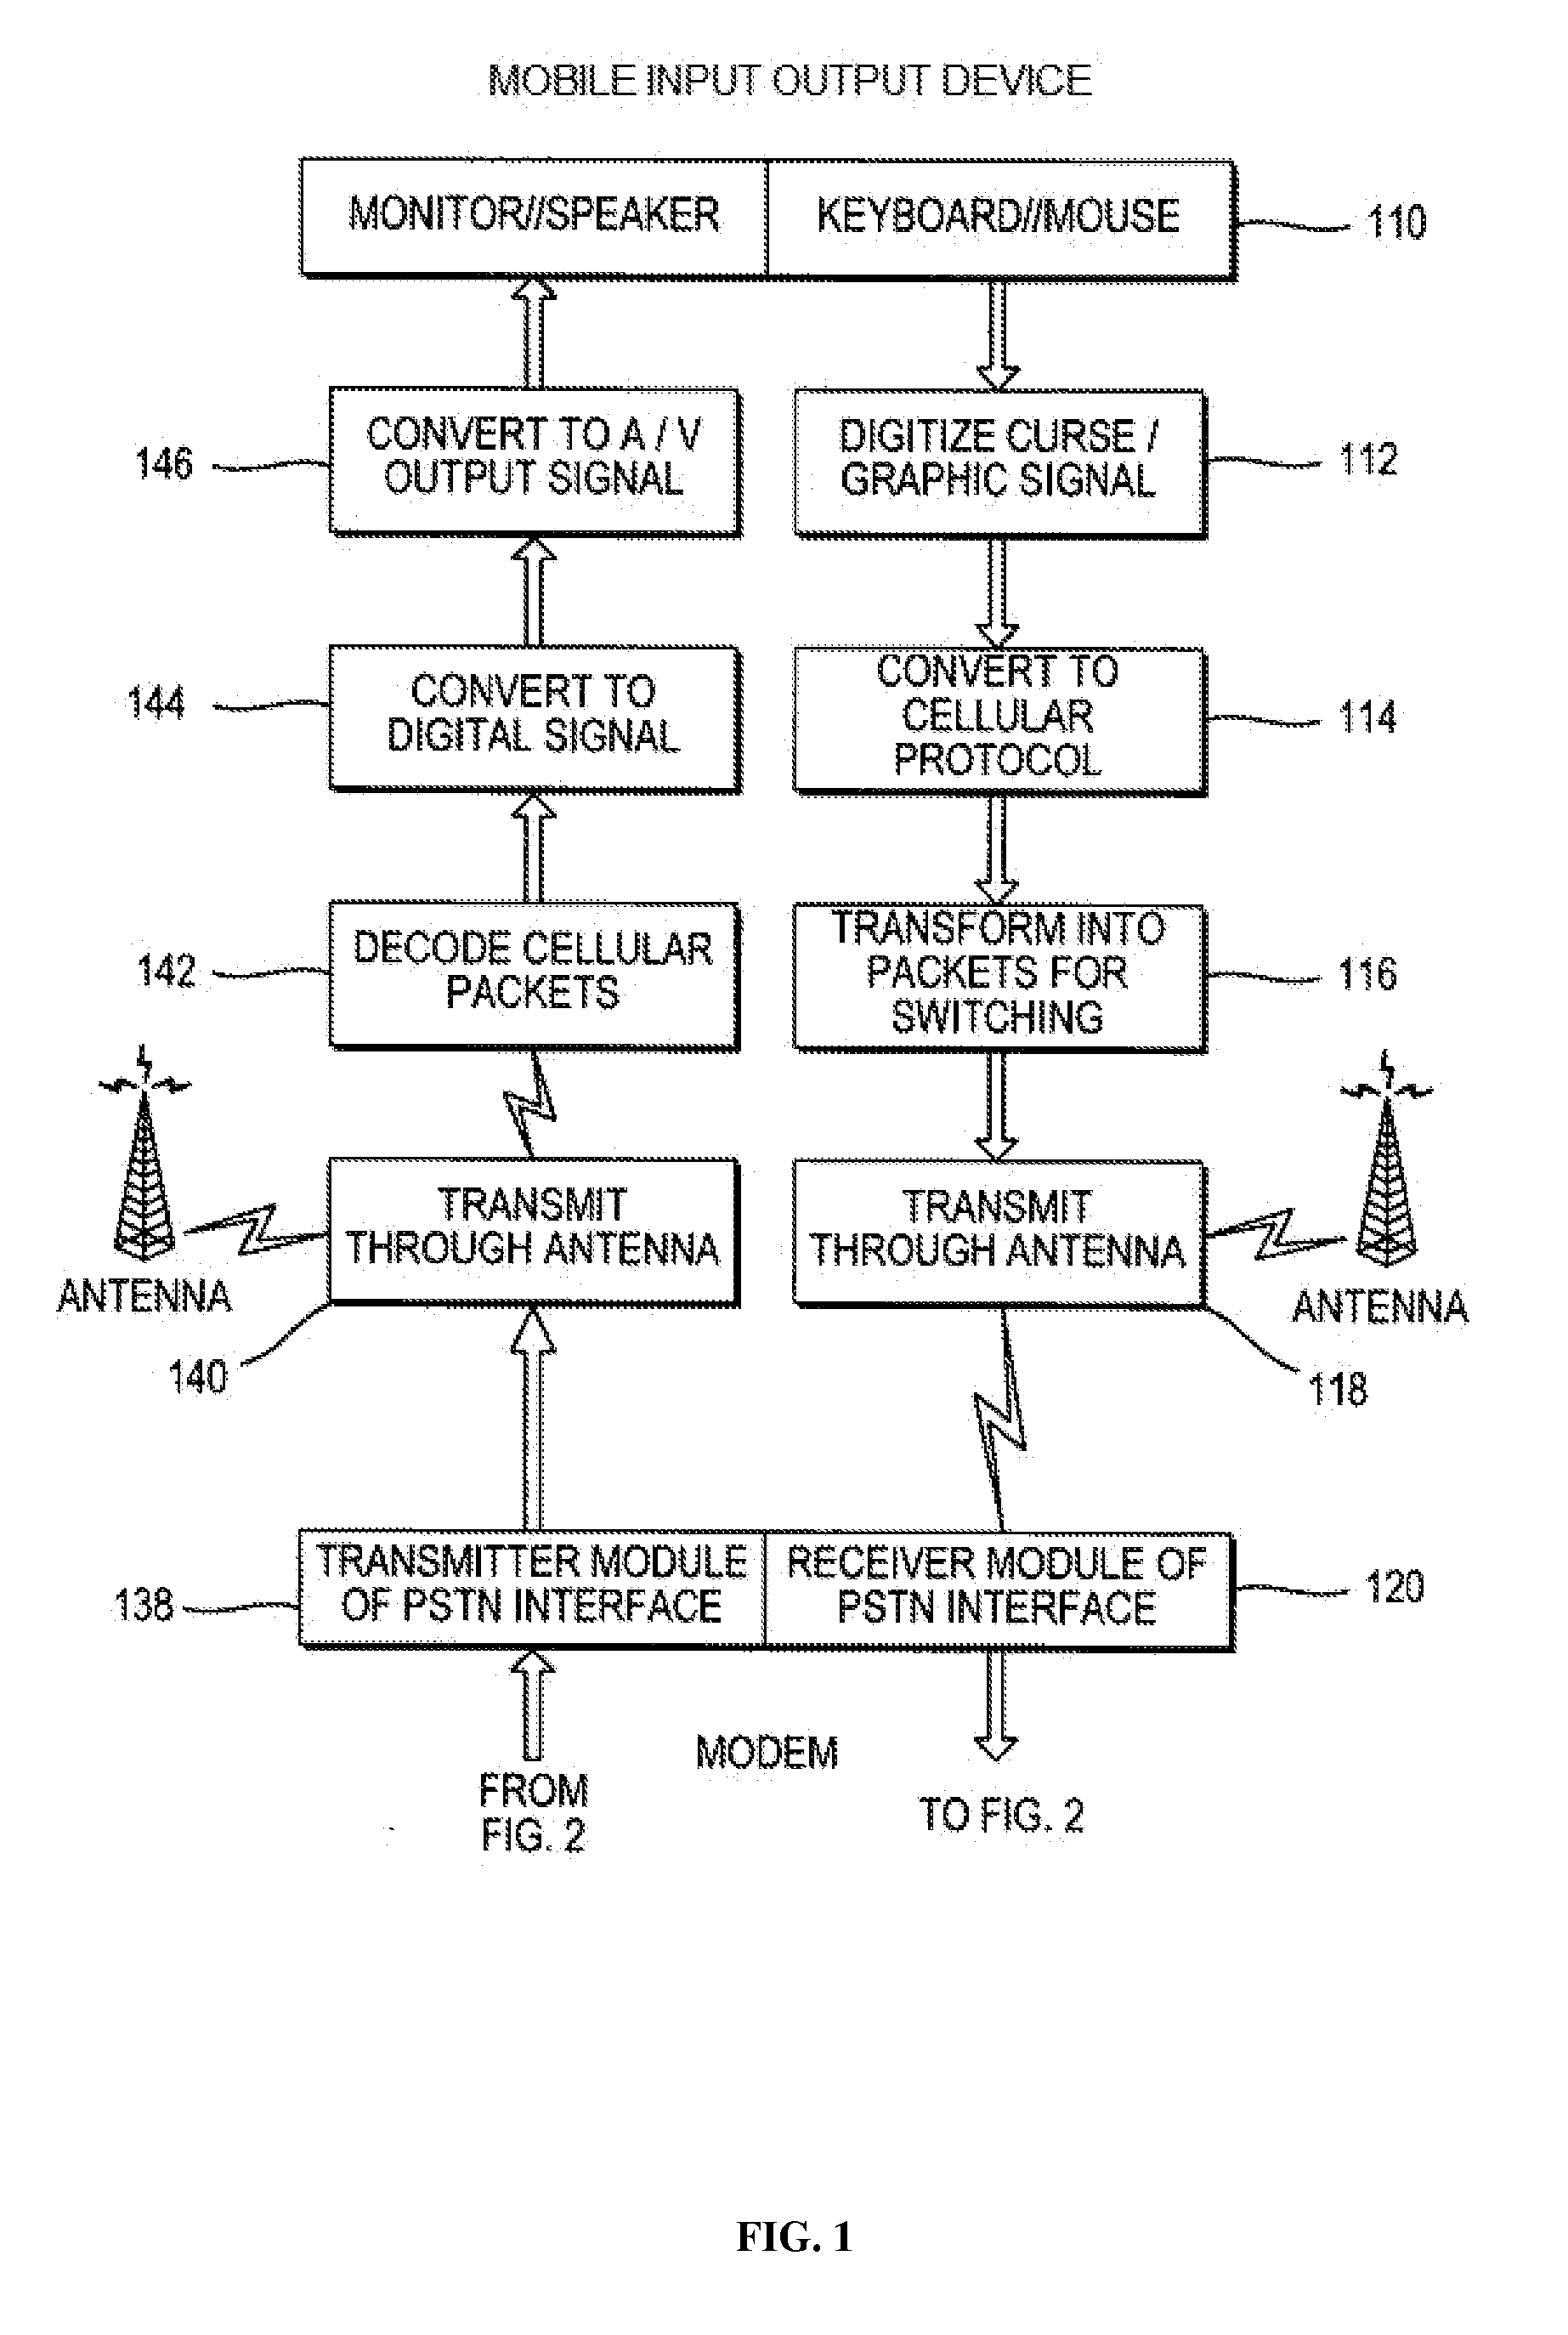 Method And System For Operating A Primary PC From A Remote Pseudo-mobile PC